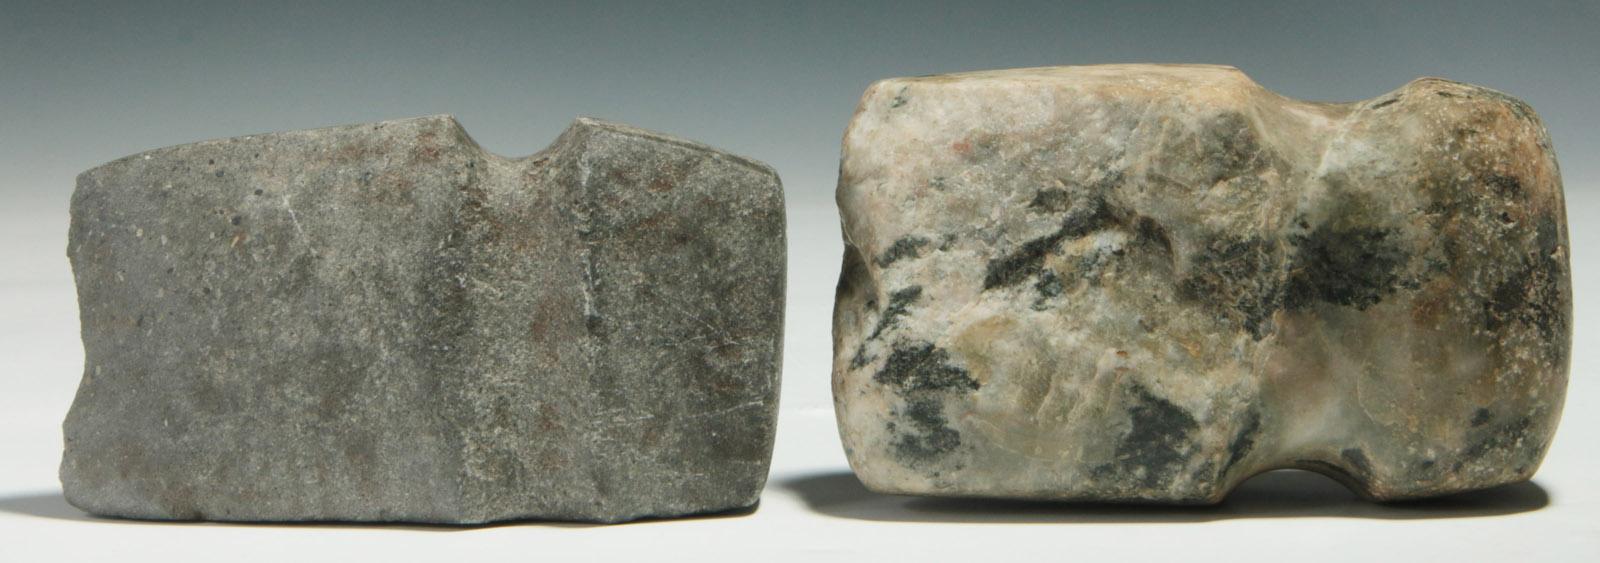 A 5.5-INCH TWO STONE AXE FORMS